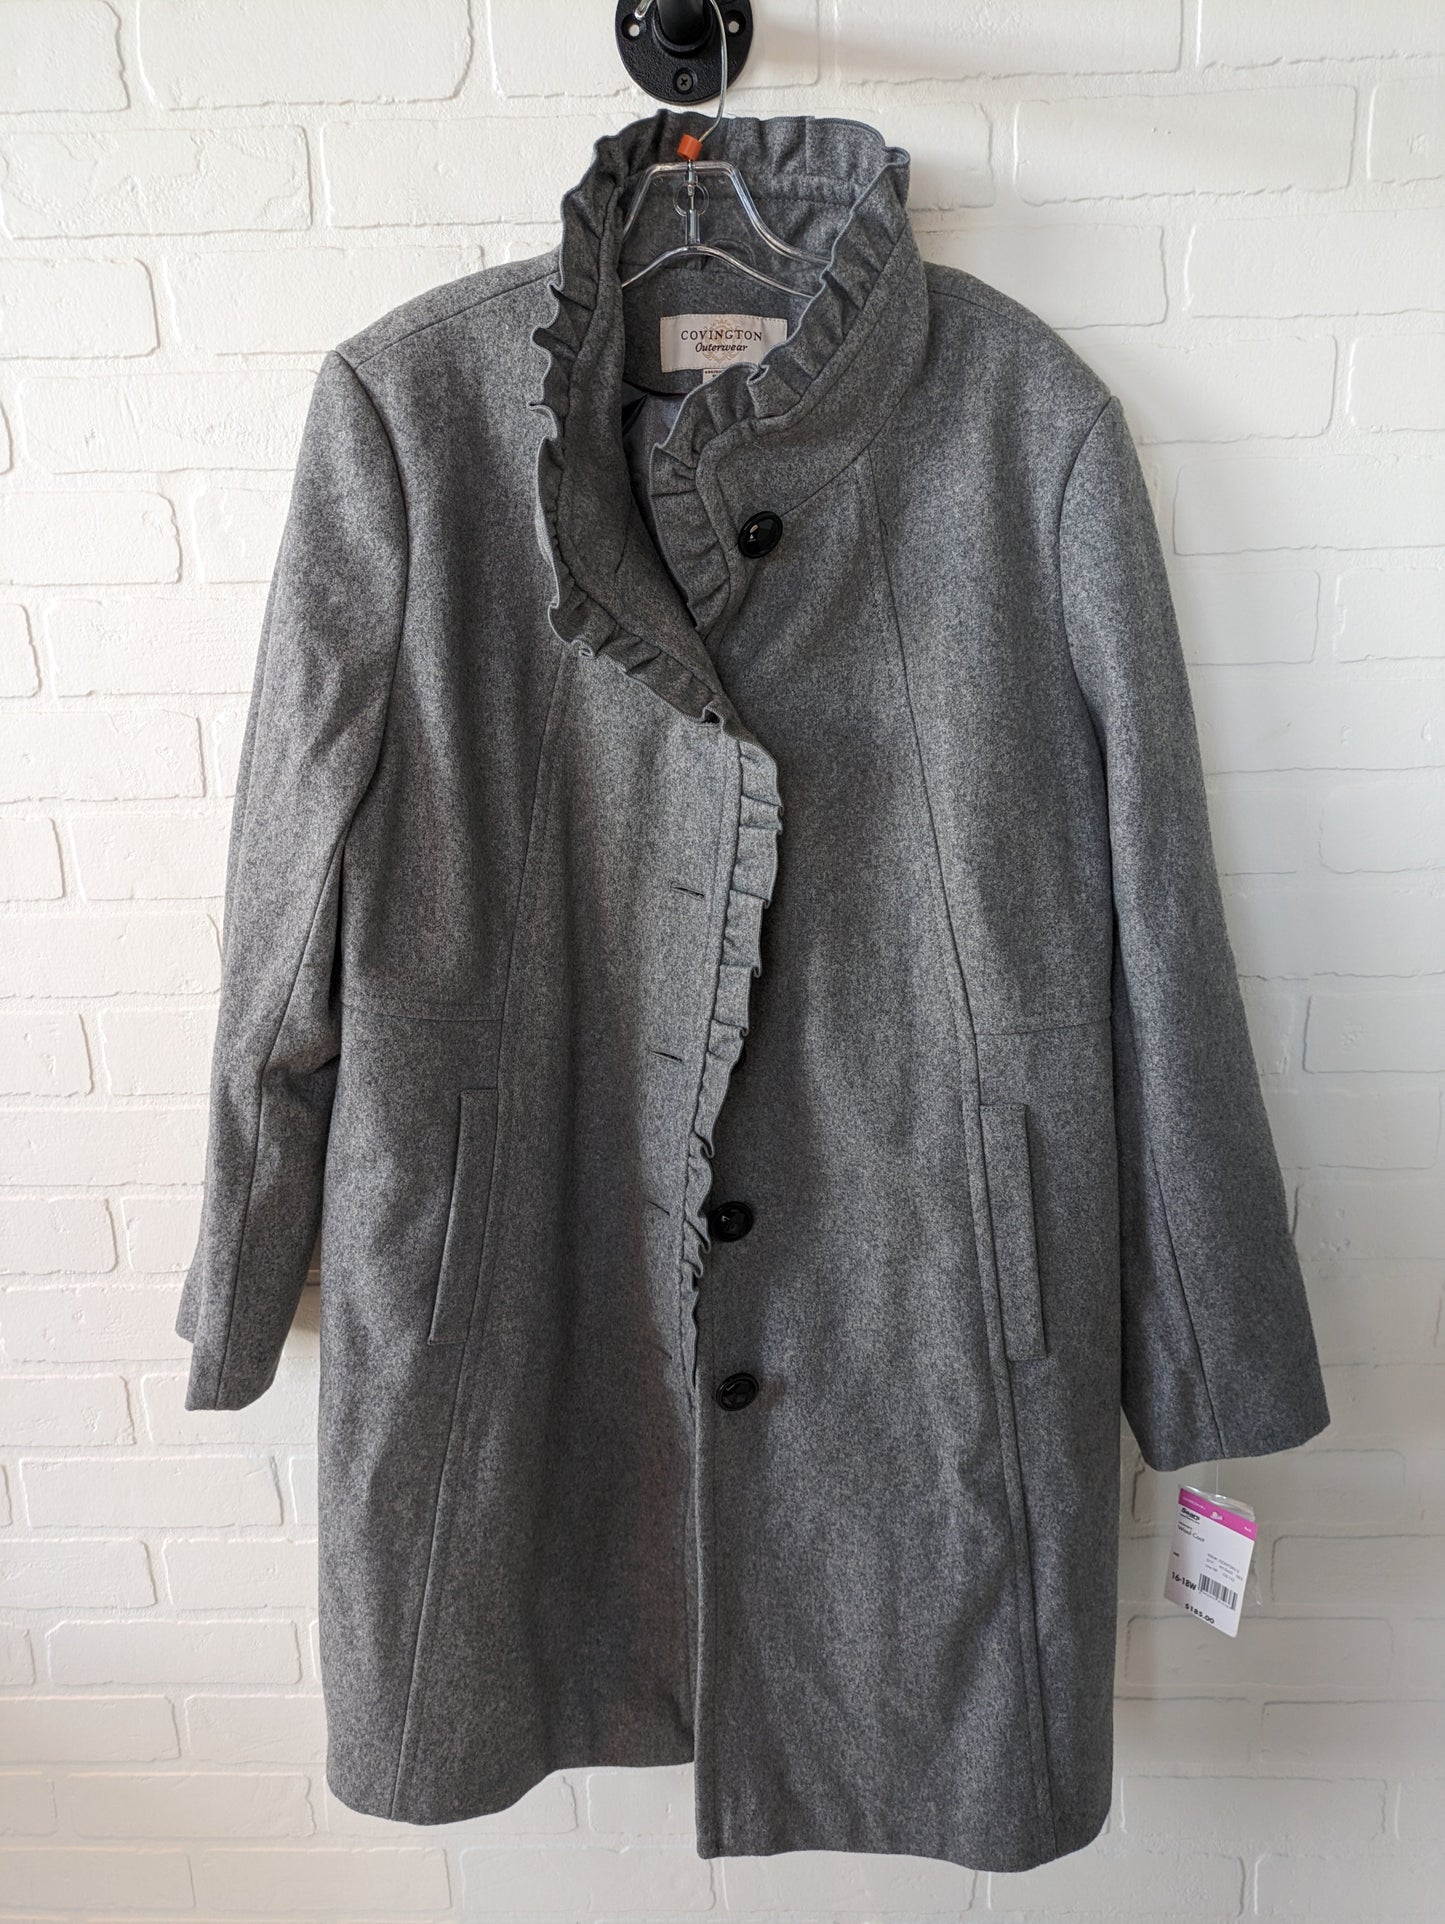 Coat Other By Covington  Size: 1x